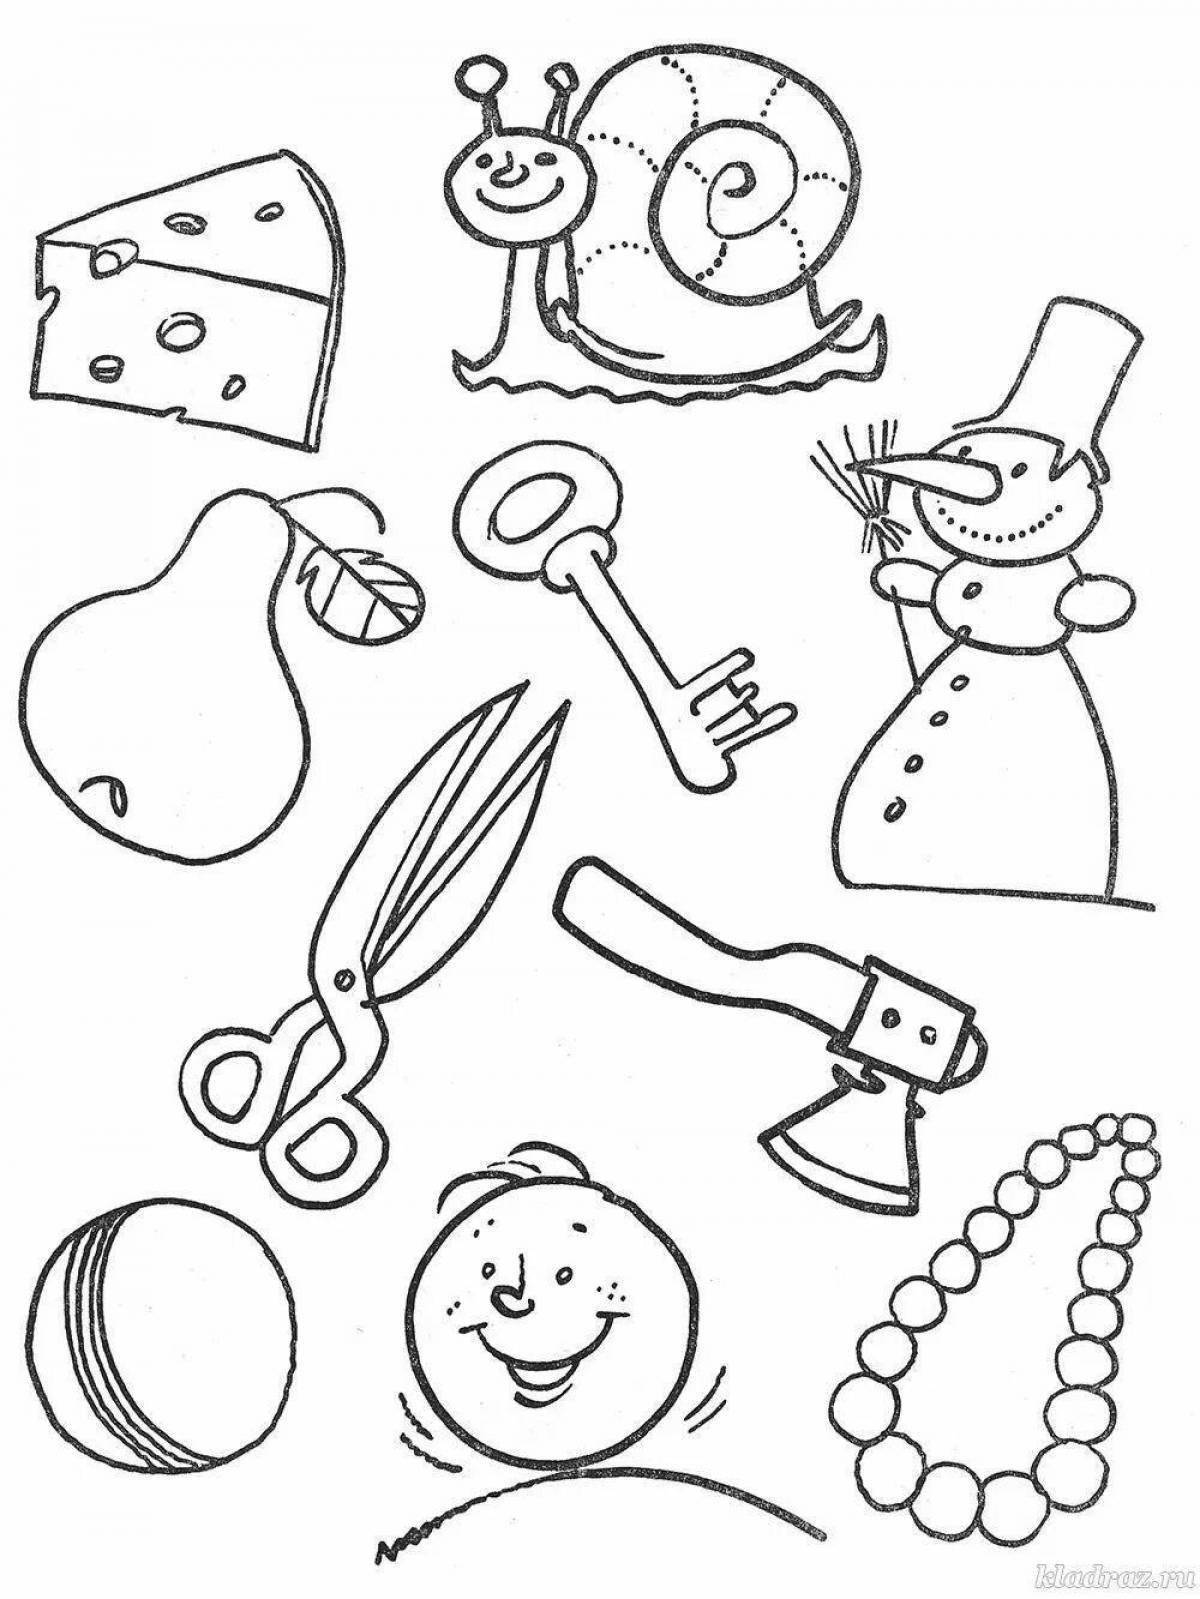 Fascinating coloring pages for girls